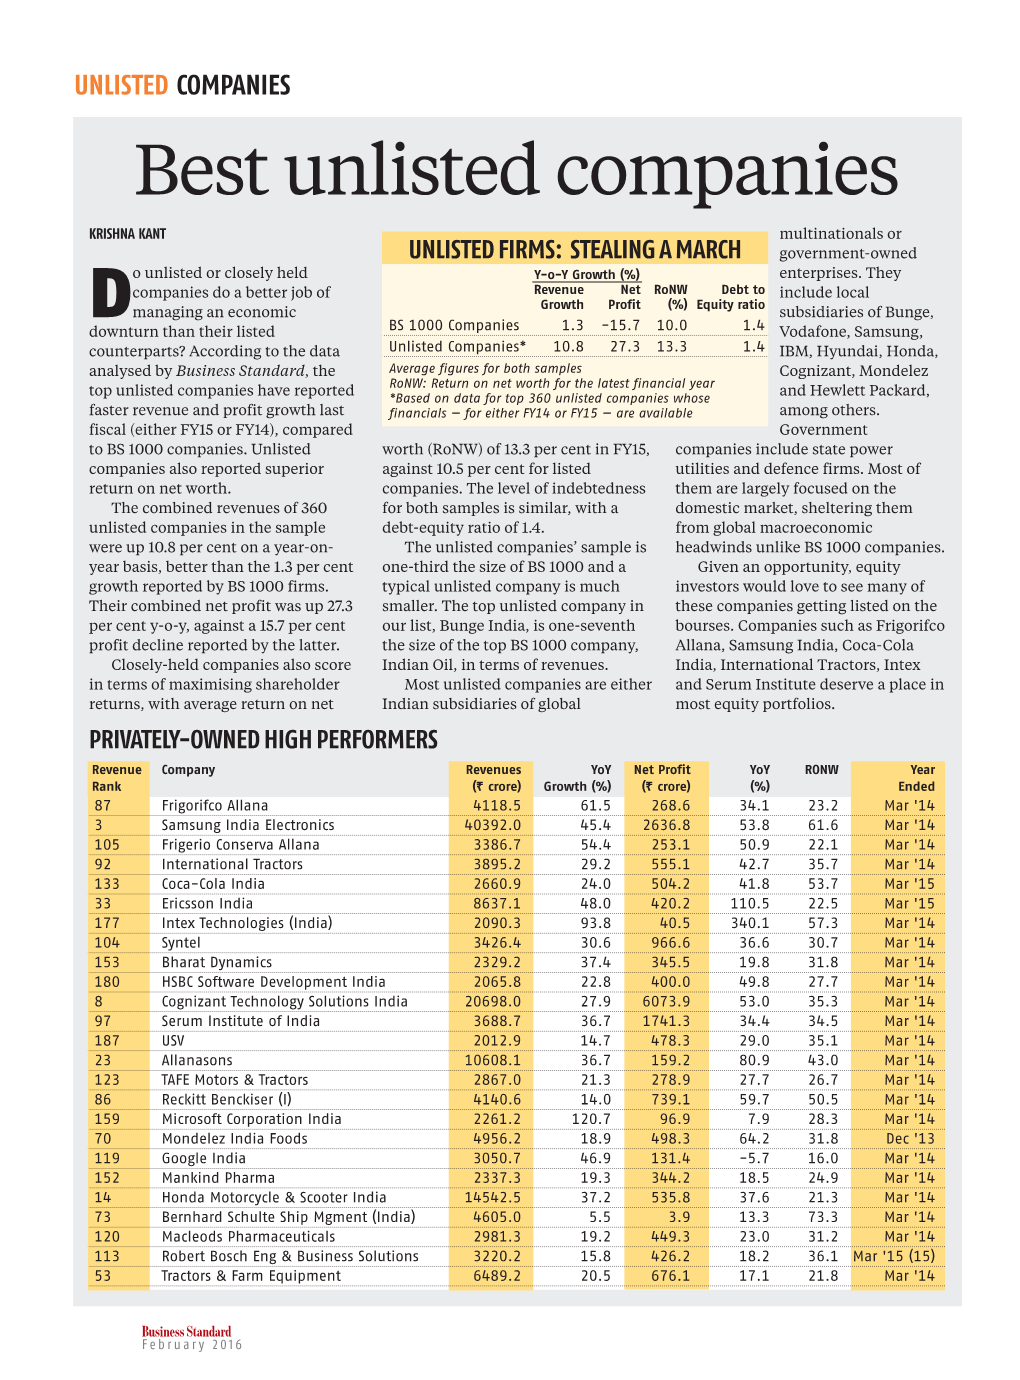 UNLISTED COMPANIES Best Unlisted Companies